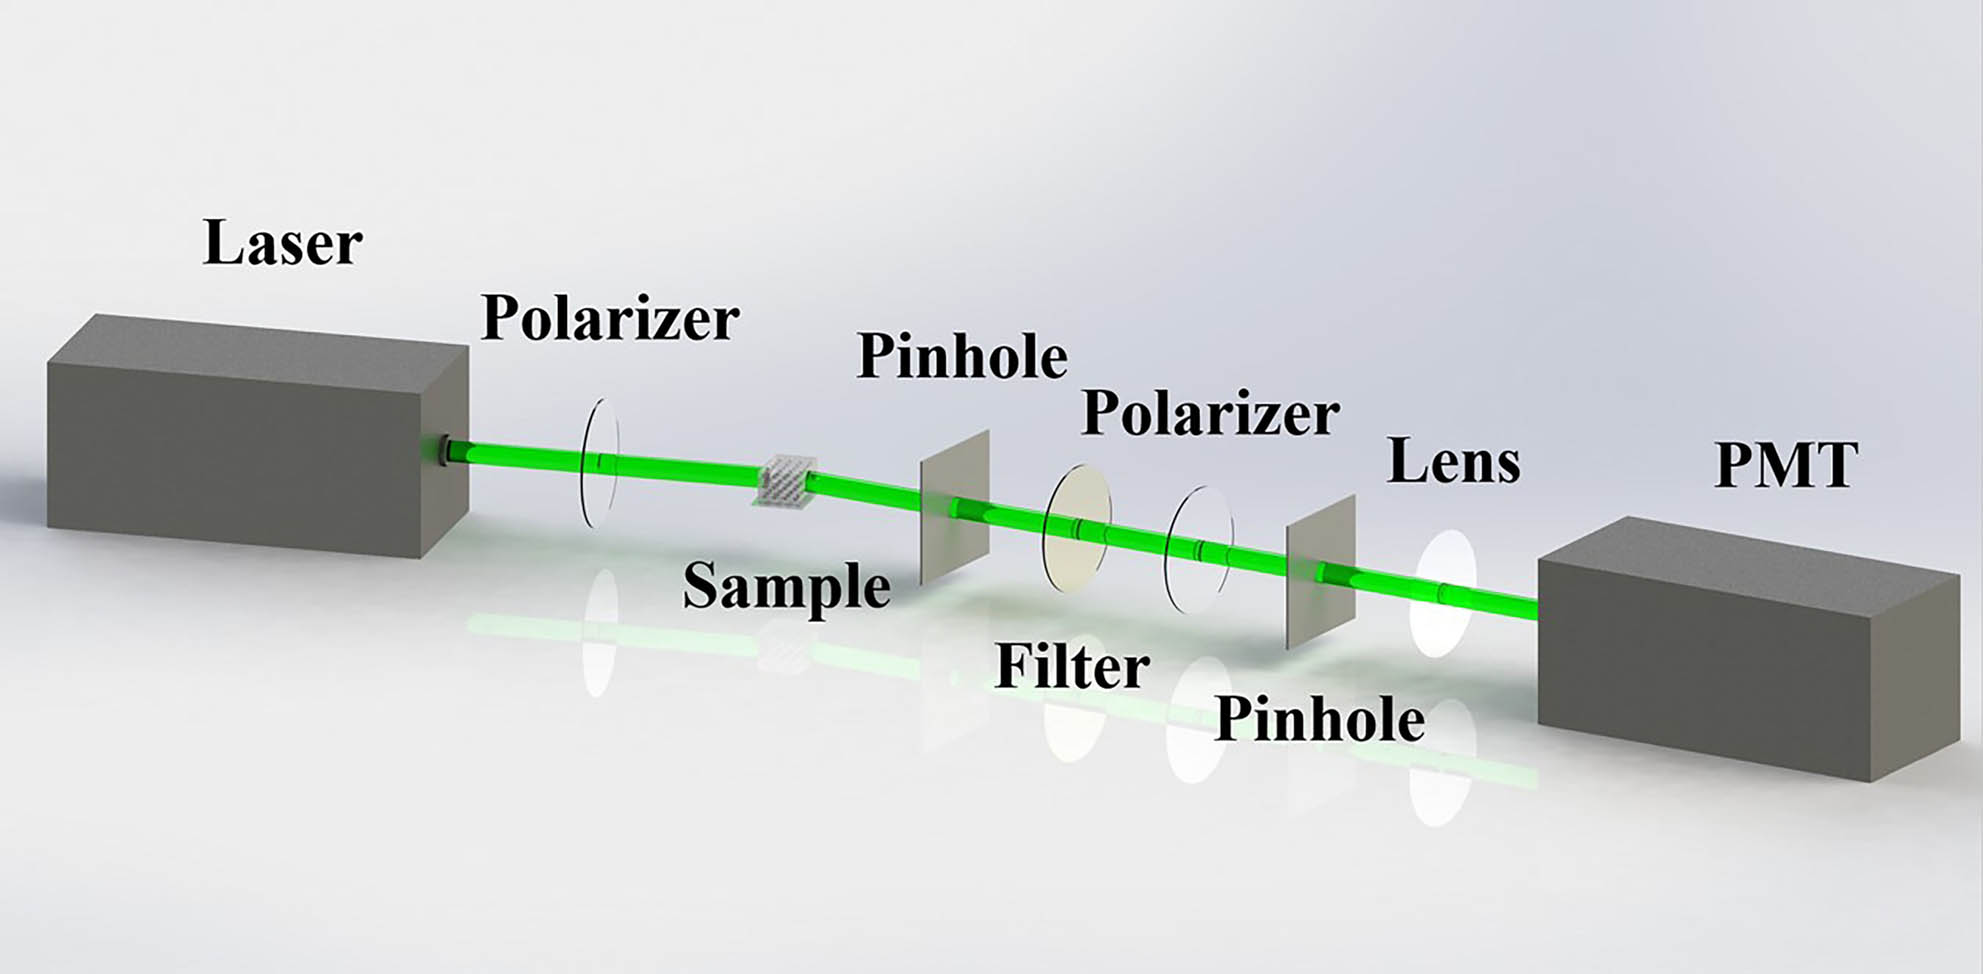 Sketch of the DLS experiment setup. A light beam with a 532 nm wavelength generated by a laser is first polarized and then shot into the crystal sample. After suffering strong diffraction in the sample, the light beam changes its direction. The pinholes and filter behind the sample make sure a light beam with a special direction can get through. Two polarizers with a V-H (vertical and horizontal) setup can pick up the light signal that has been influenced by the super crystal structure. To increase the capturing efficiency of the light signal, a lens is localized in front of the PMT.